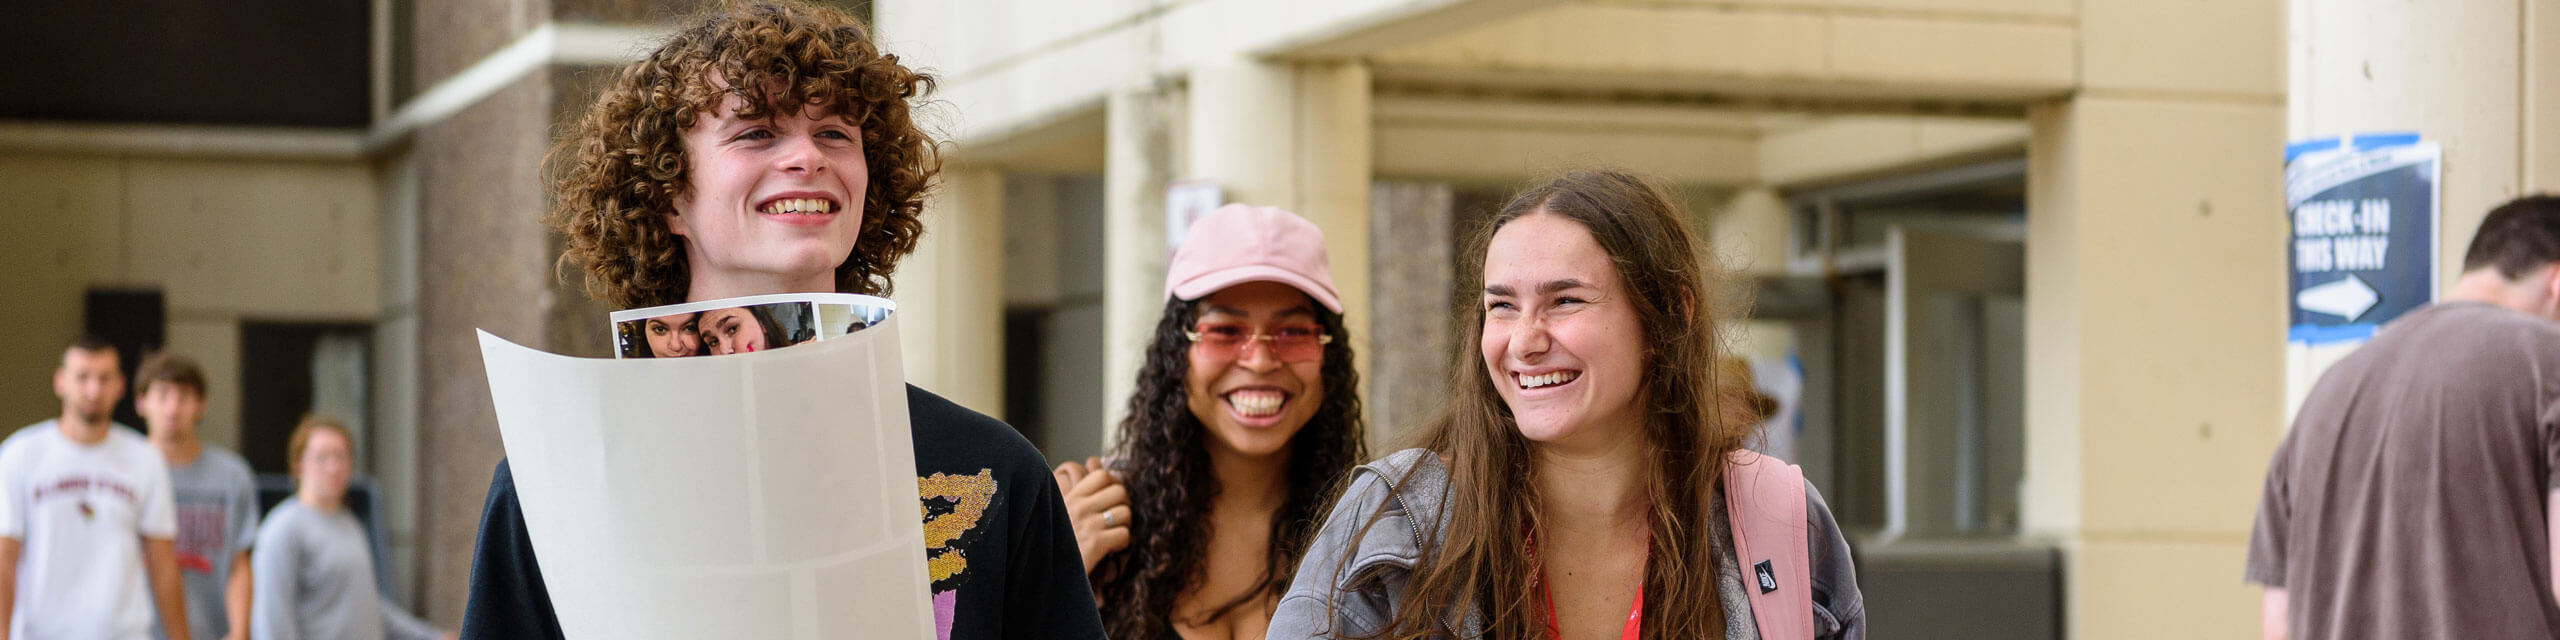 Students smile as they move-in.